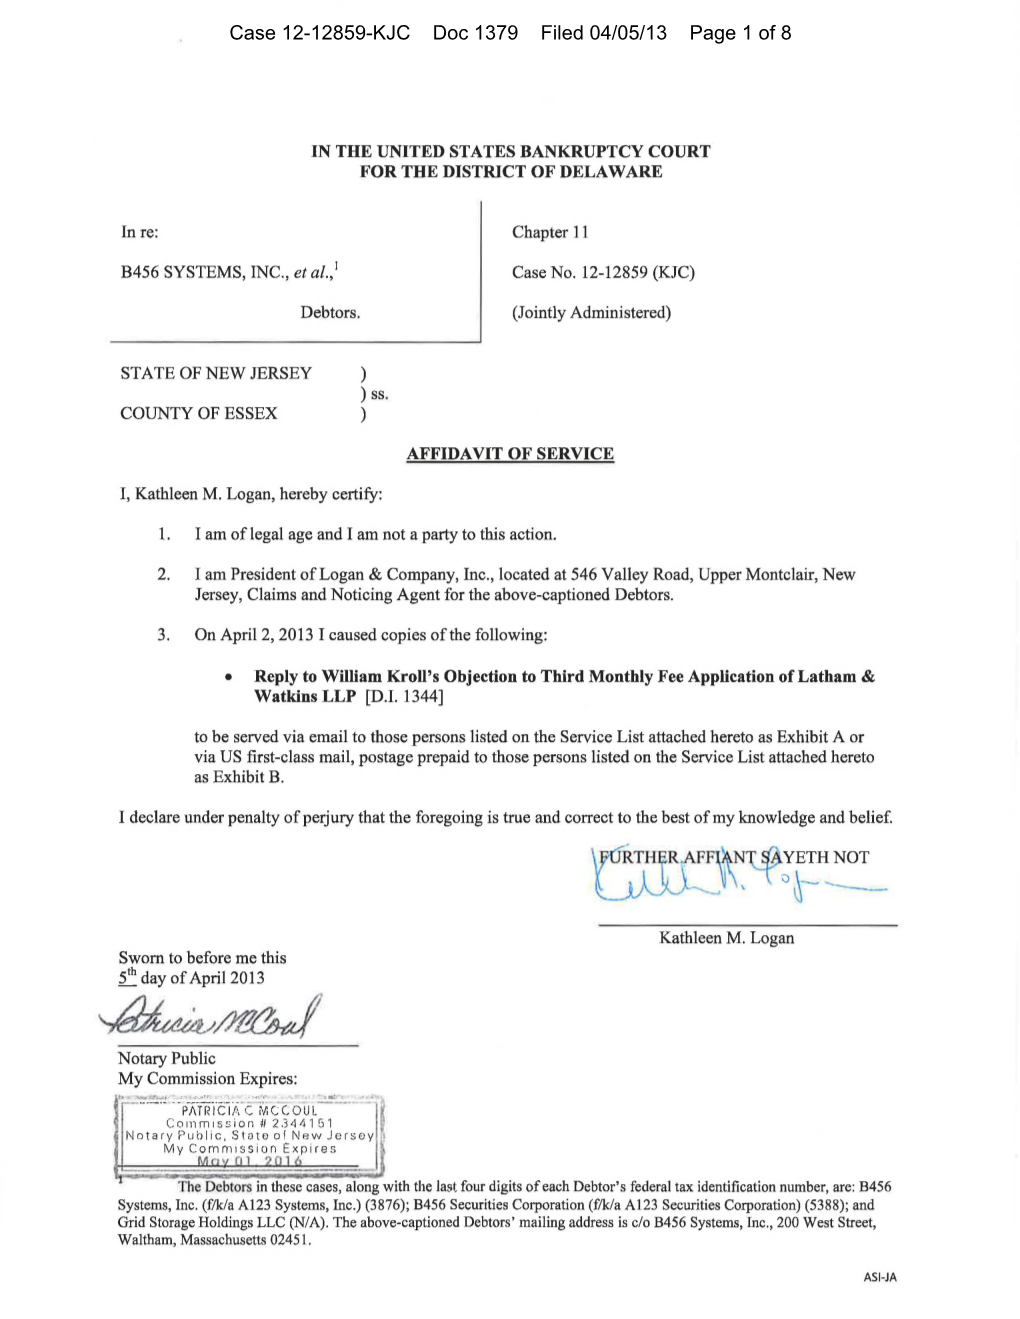 Case 12-12859-KJC Doc 1379 Filed 04/05/13 Page 1 of 8